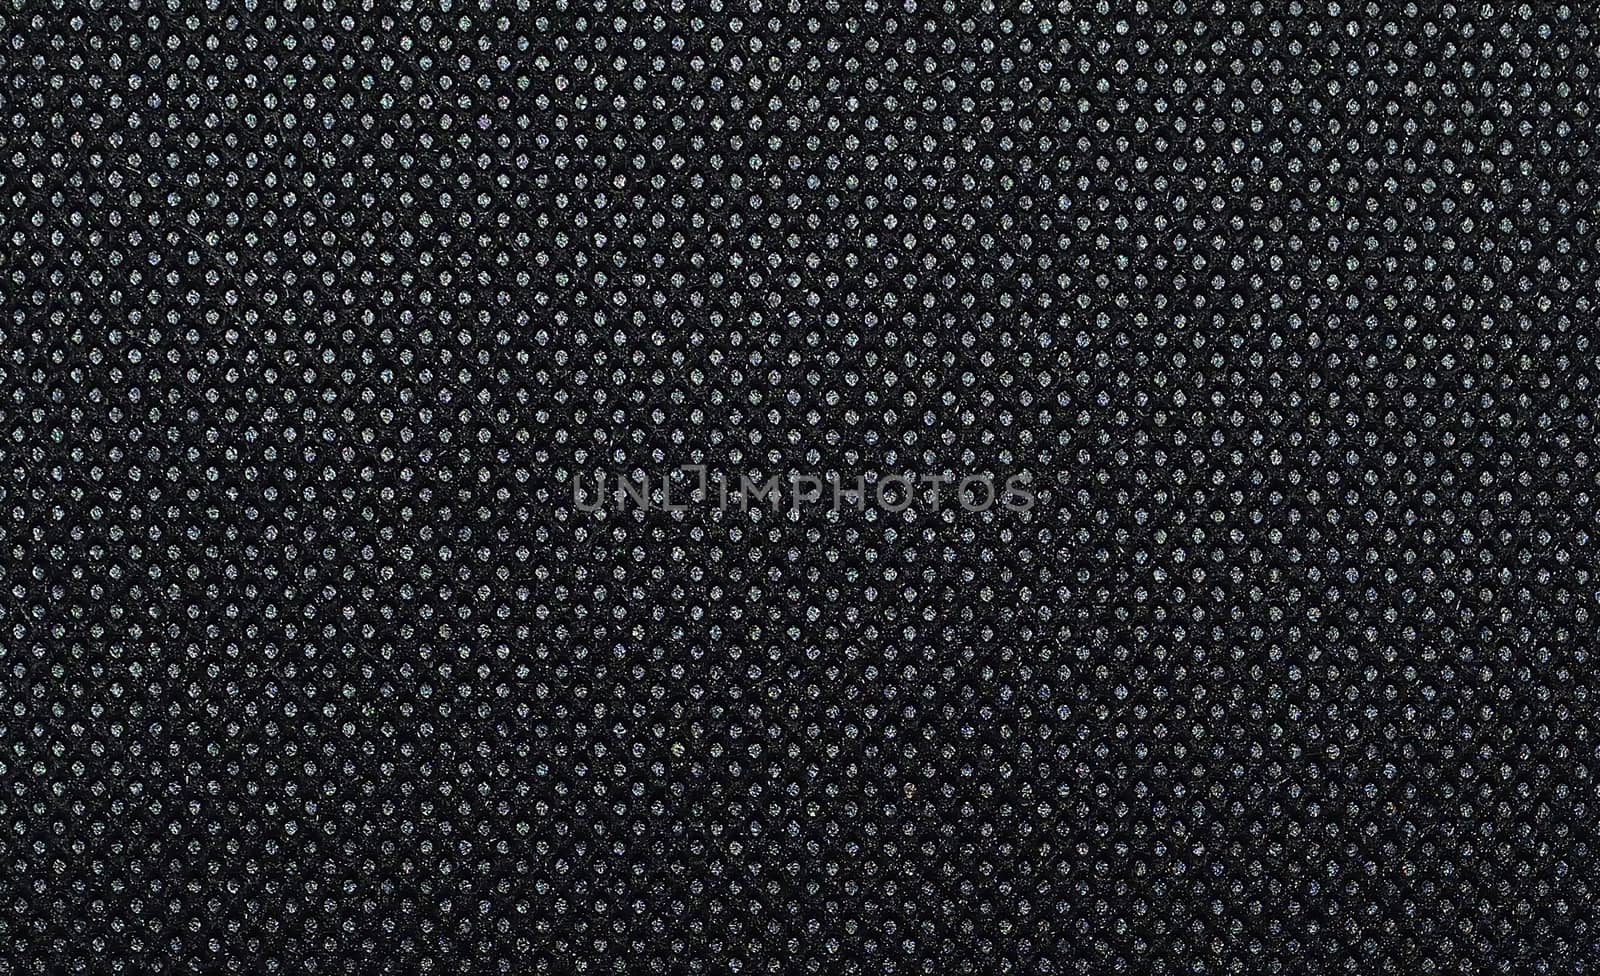 Black color net pattern extracted from cloth with glittering feature.